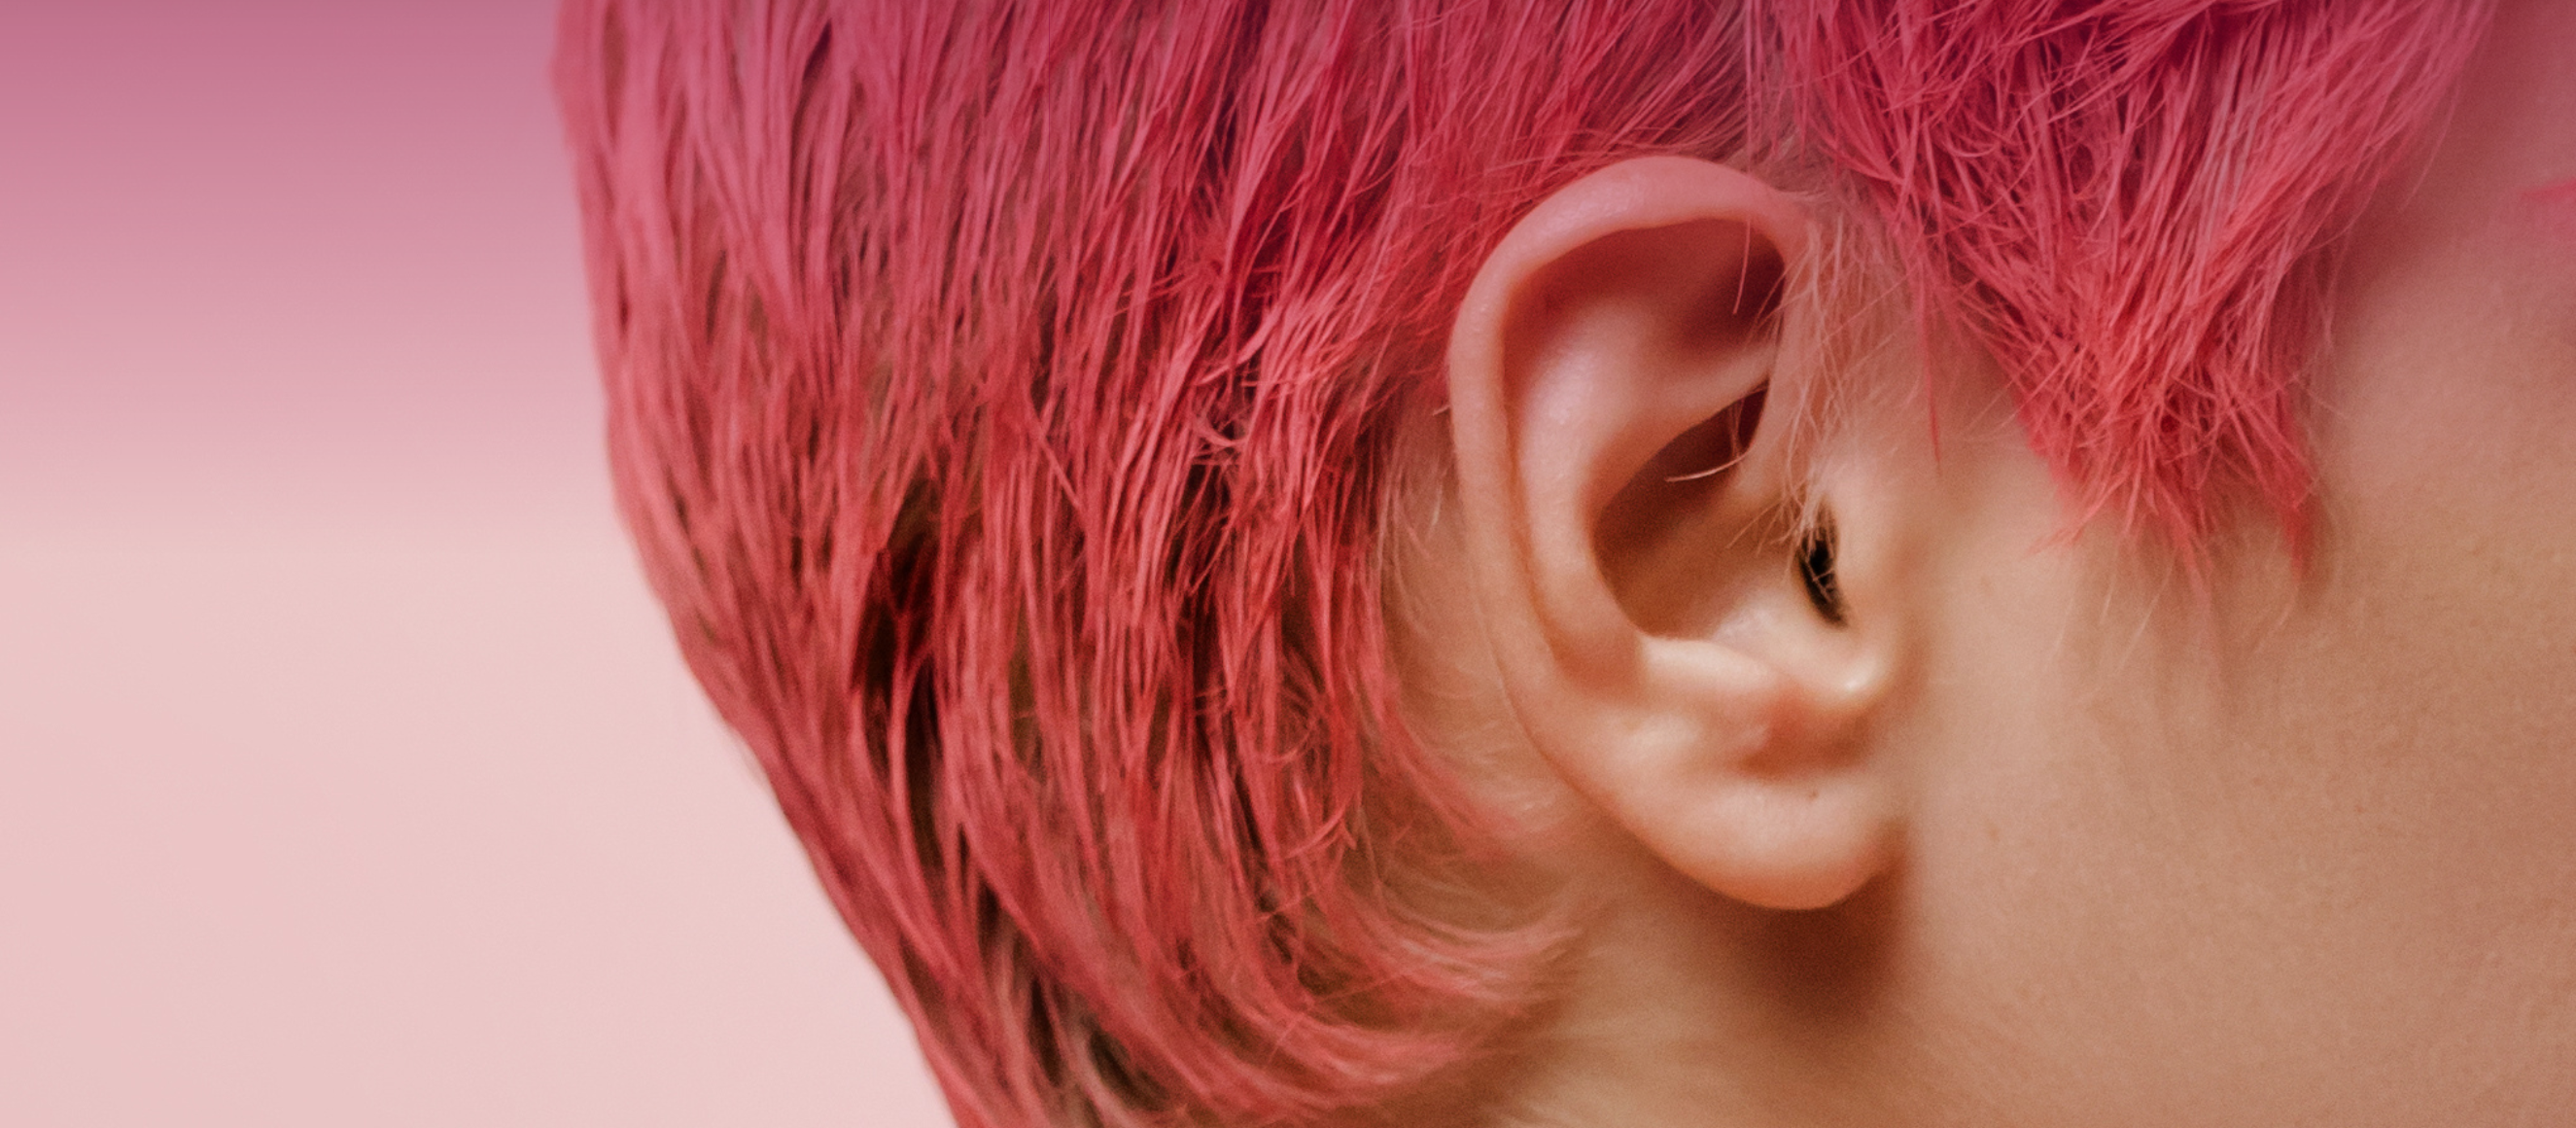 Close-up photo of the side of a woman's head and ear. Her hair is cut into a bright pink pixie cut.